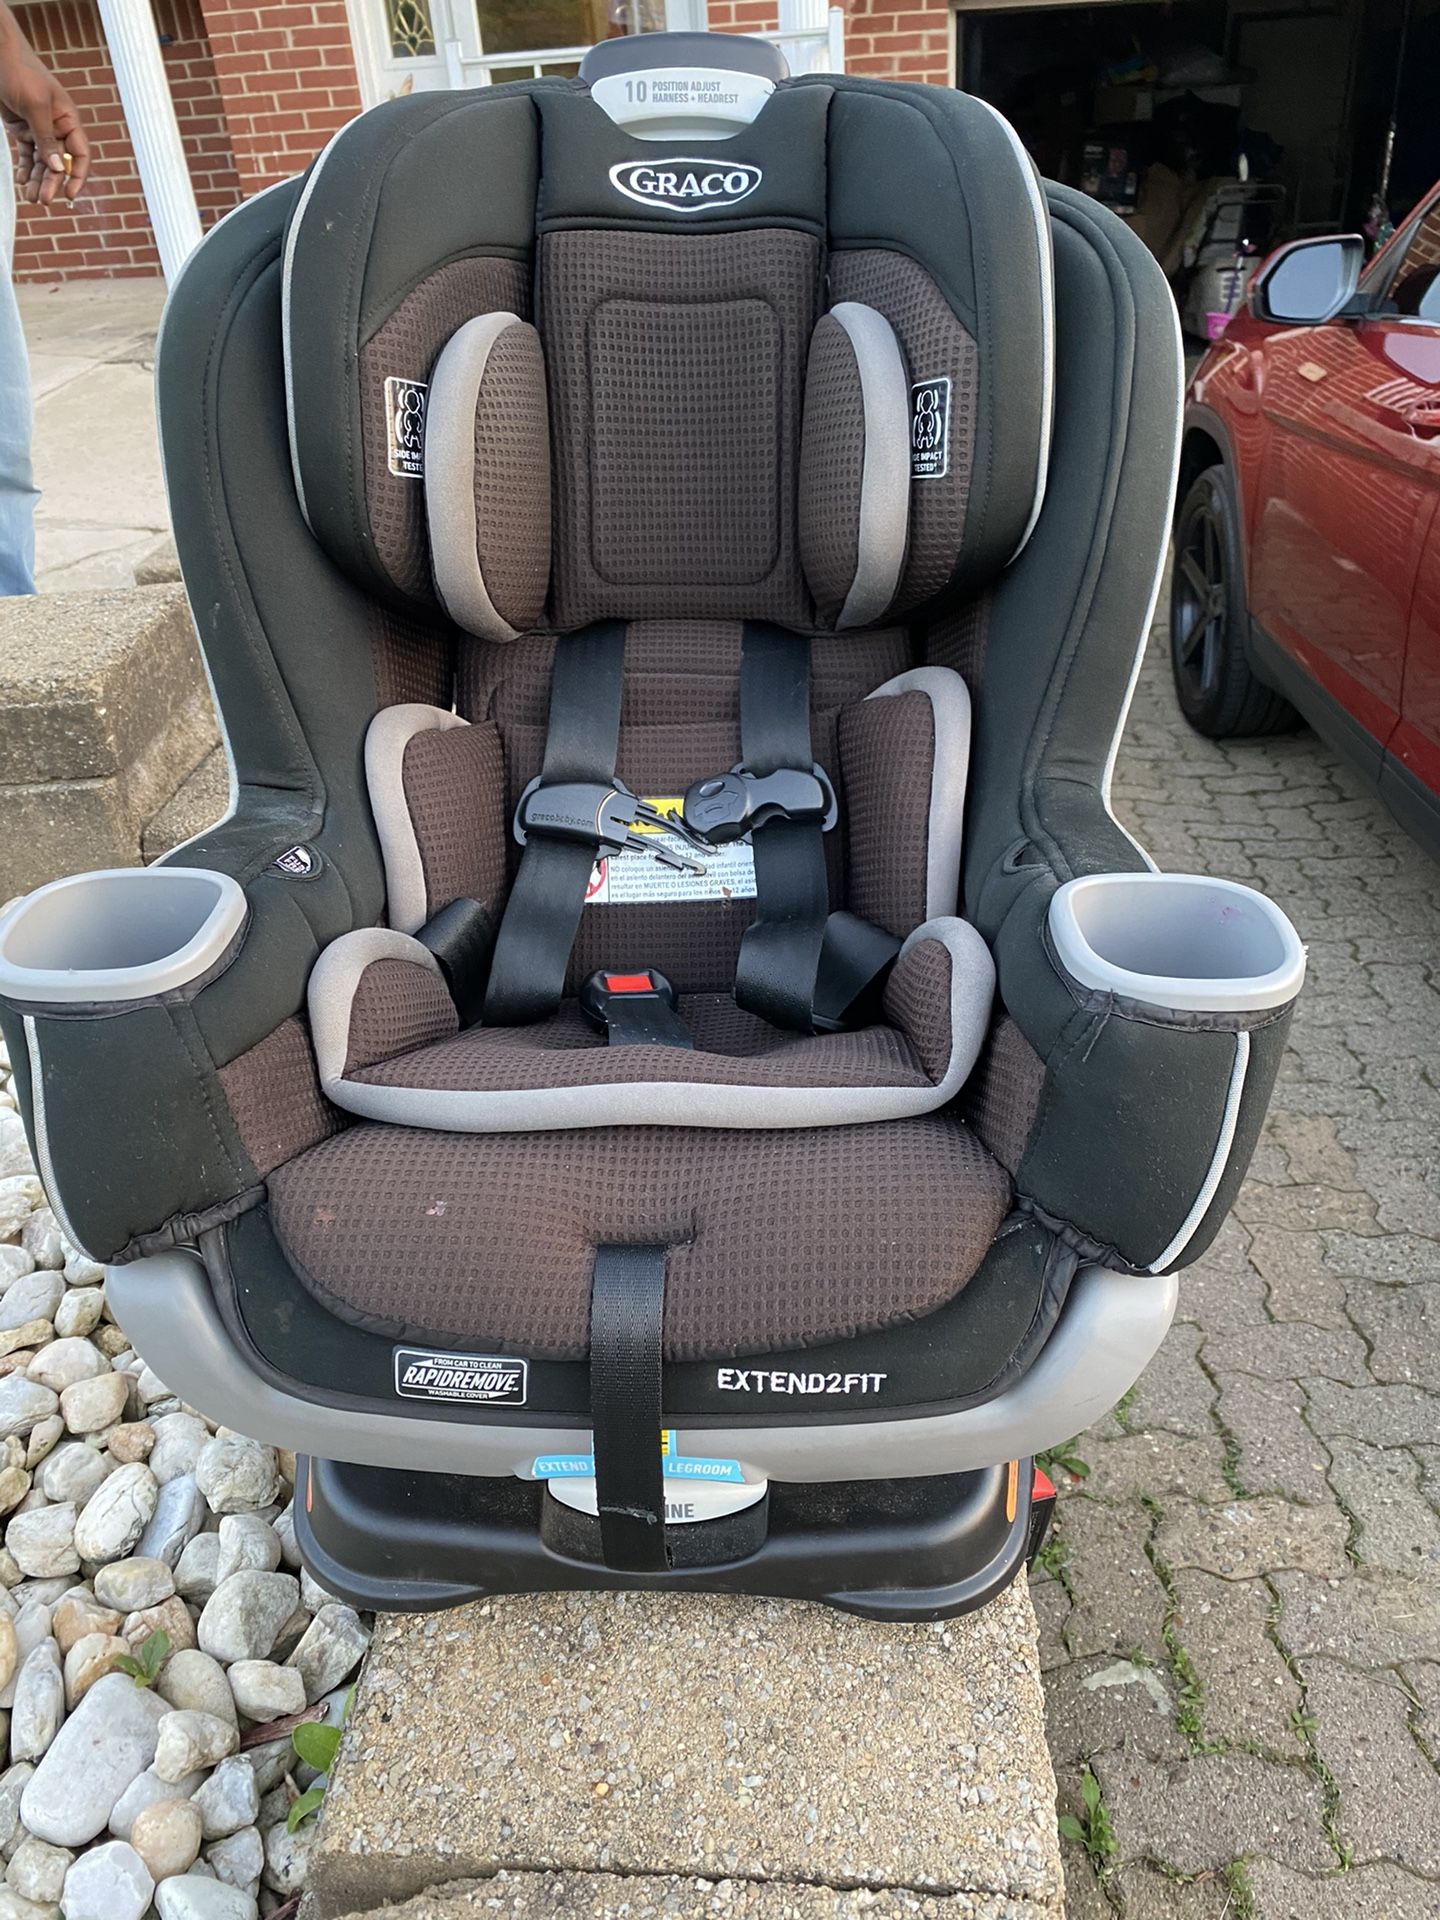 Extend 2 Fit Graco Car seat